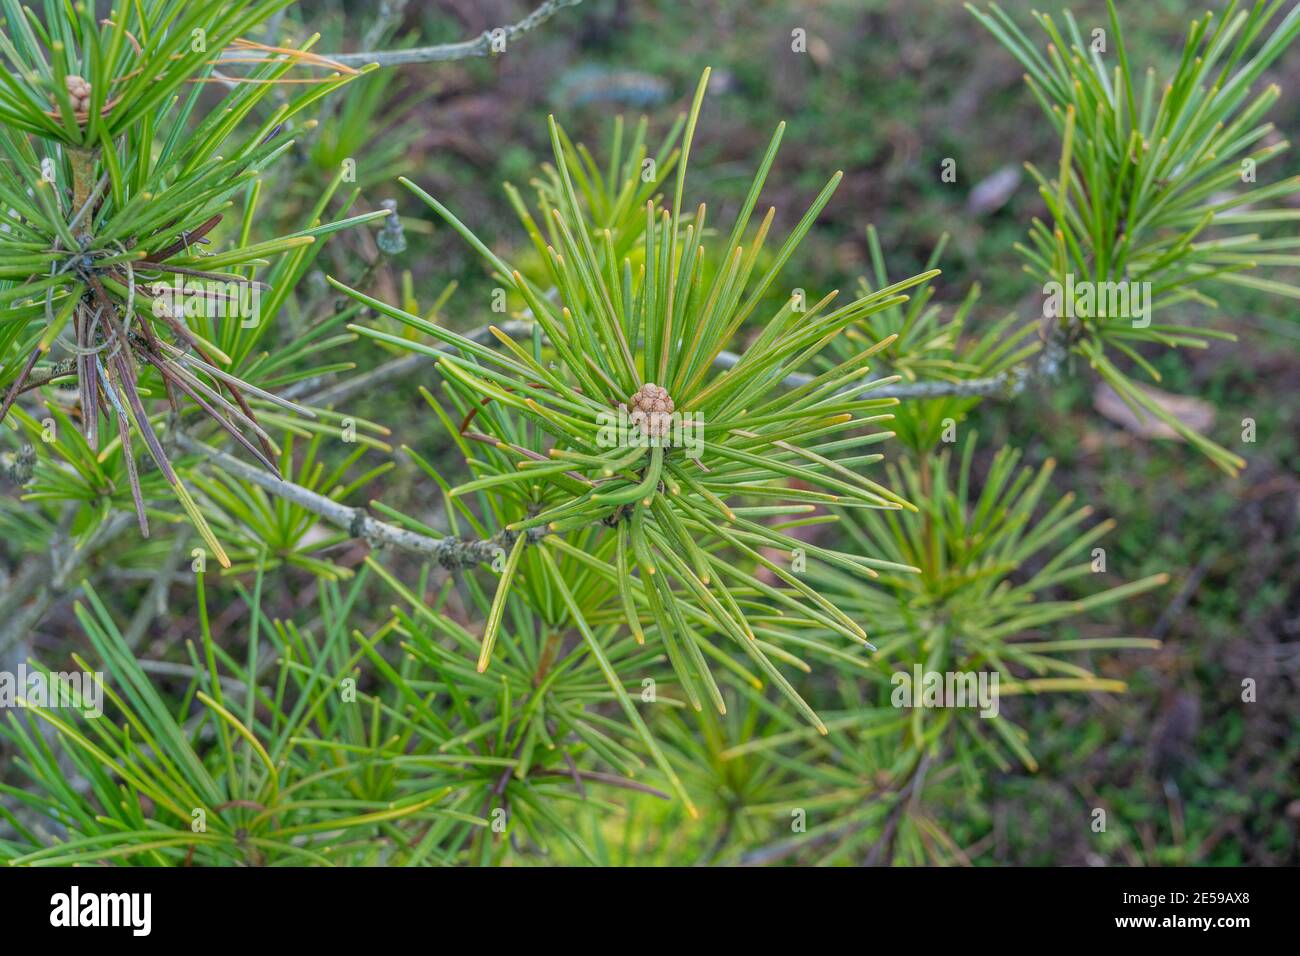 Japanese umbrella-pine (Sciadopitys verticillata) is a unique conifer endemic to Japan. It is the sole member of the family Sciadopityaceae and genus Stock Photo